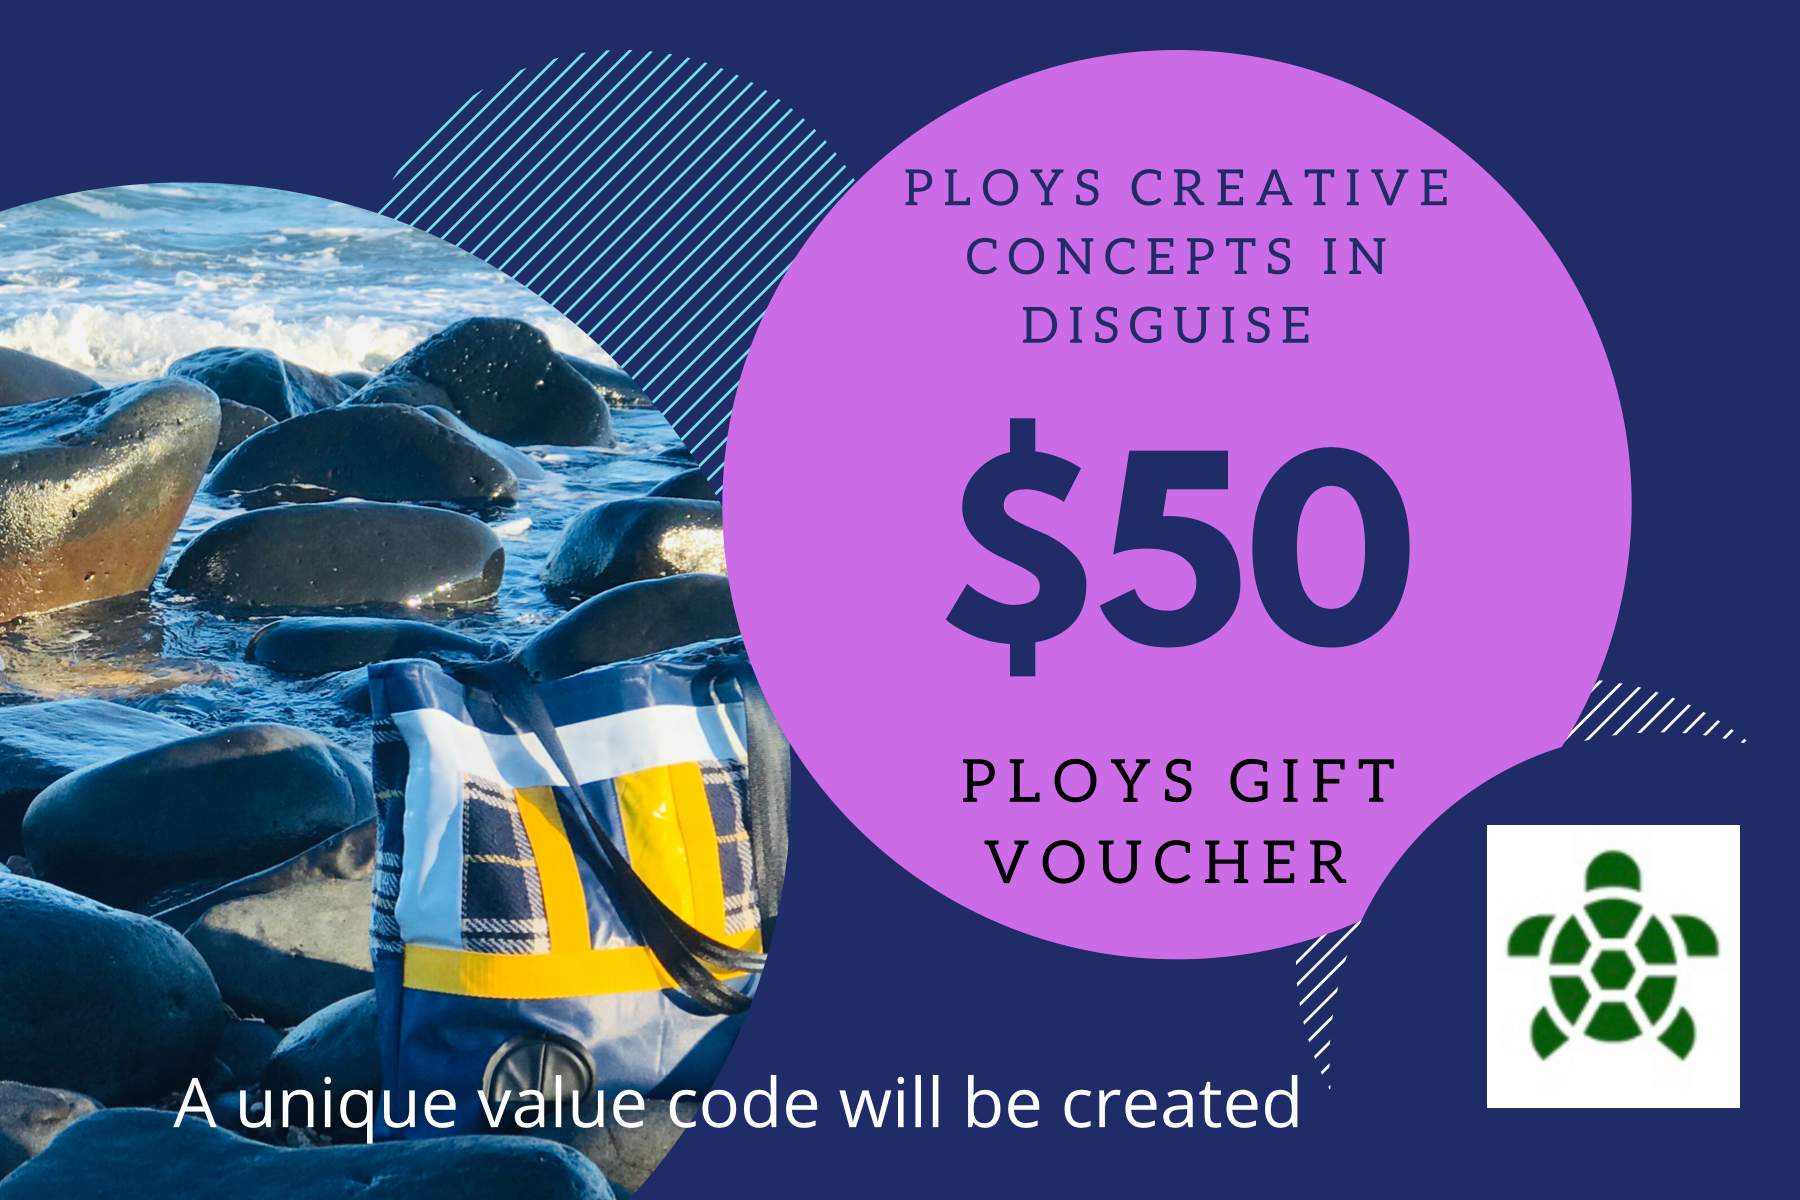 PLOYS bags from recycled pool inflatables gift vouchers $50